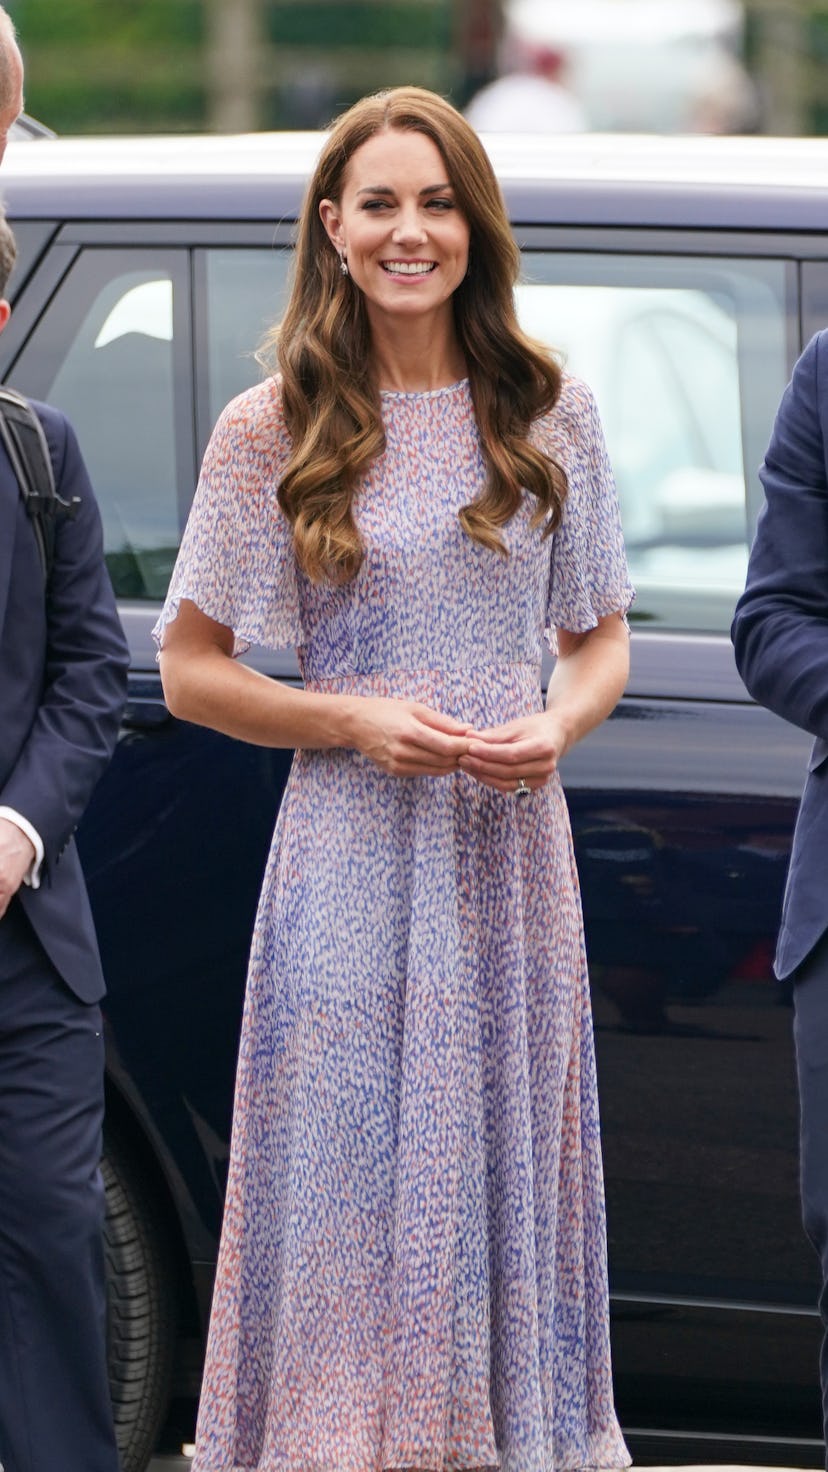 Kate Middleton at Newmarket Racecourse on June 23, 2022 